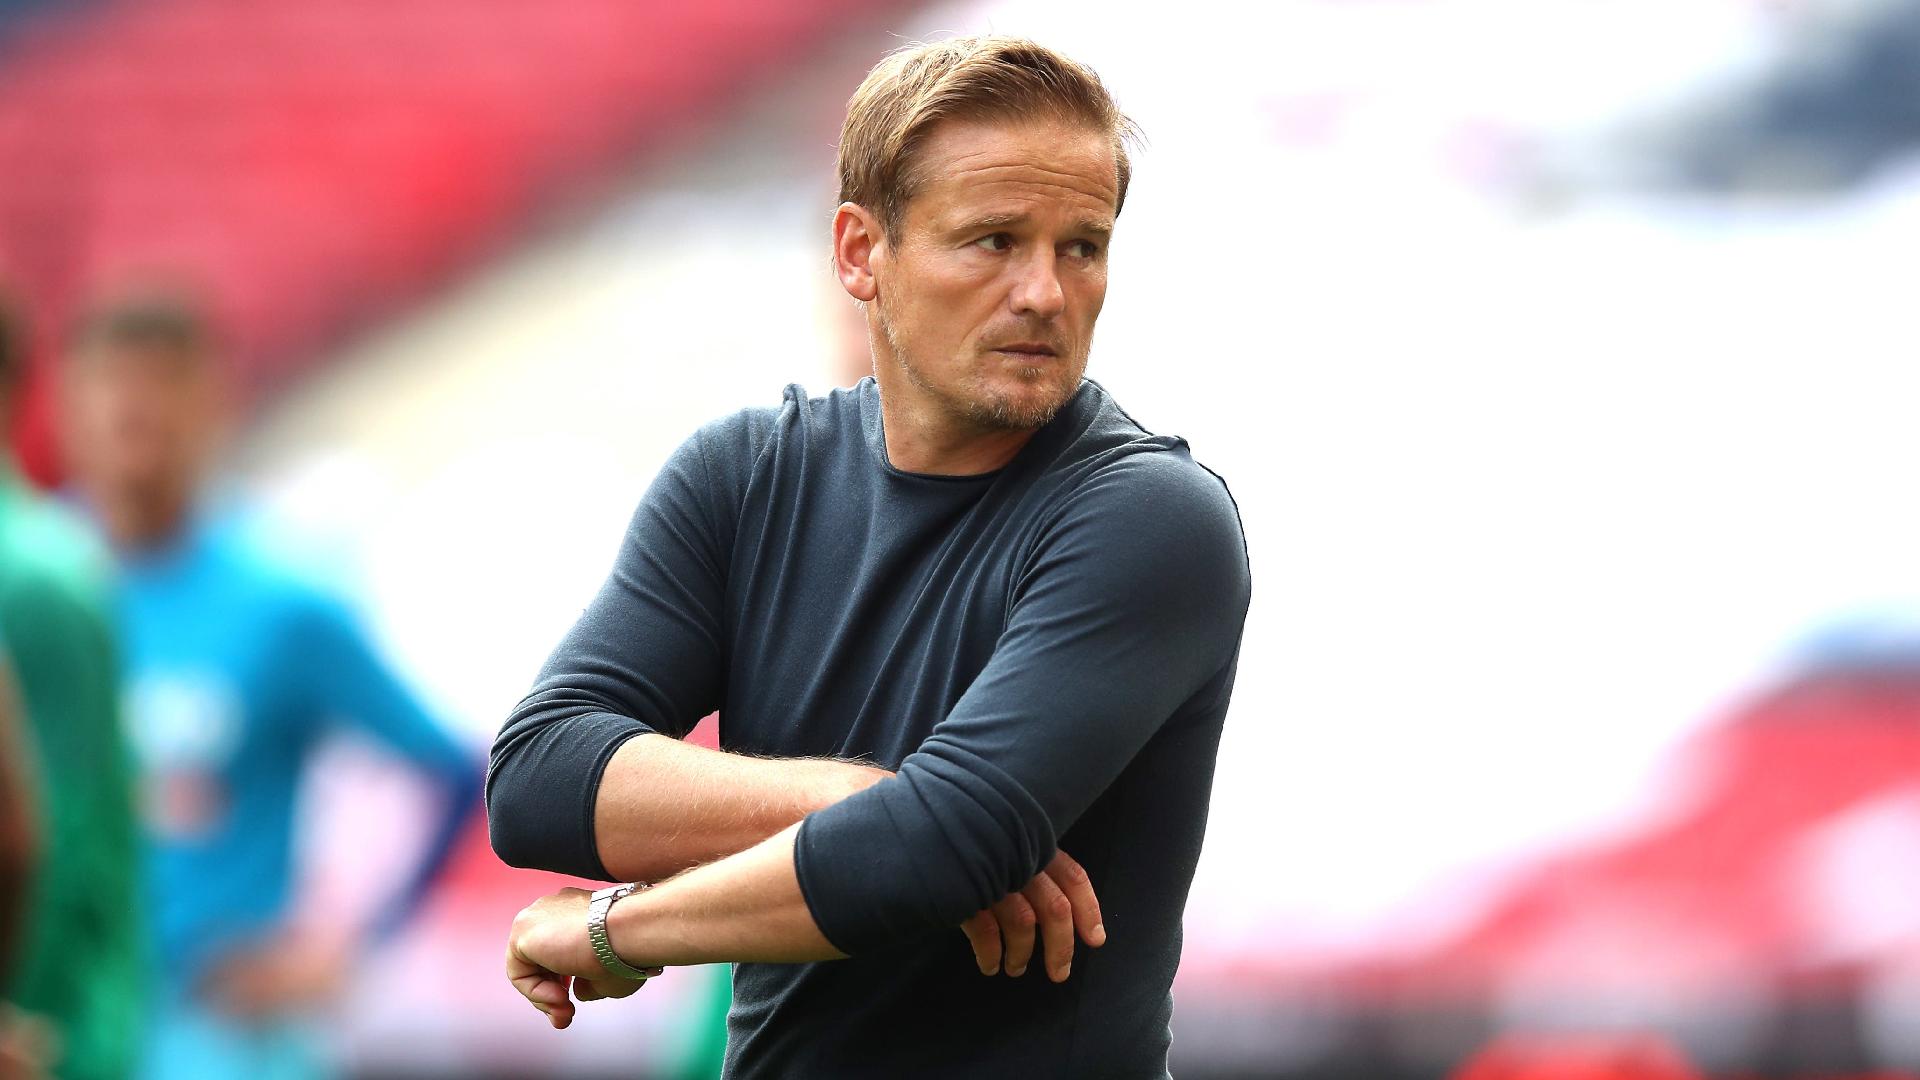 York boss Neal Ardley: We found a way to win the game